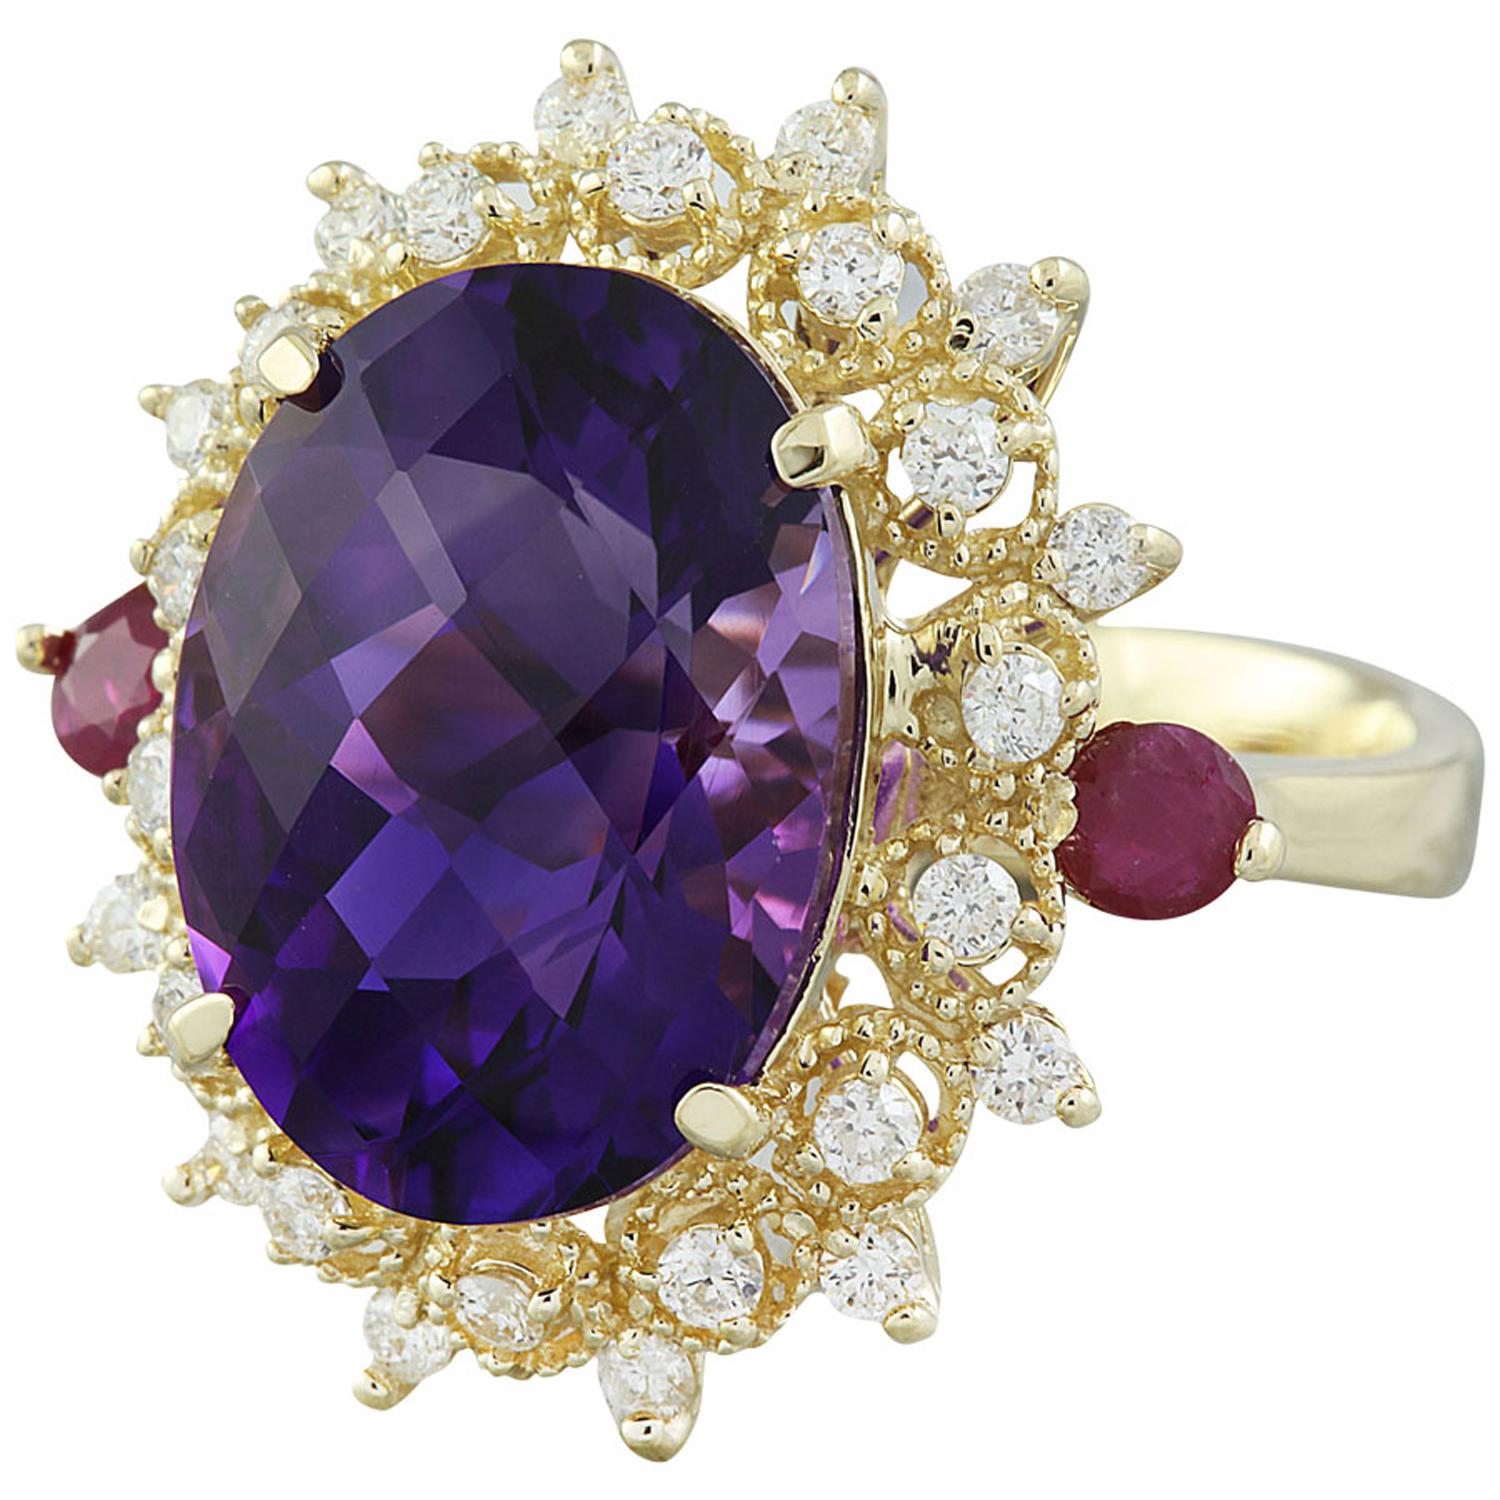 8.60 Carat Natural Amethyst and Ruby 14 Karat Solid Yellow Gold Diamond Ring
Stamped: 14K 
Total Ring Weight: 6.8 Grams 
Amethyst Weight: 8.00 Carat (15.00x11.00 Millimeters)
Ruby Weight: 0.10 Carat (3.00x3.00 Millimeters)
Diamond Weight: 0.50 carat